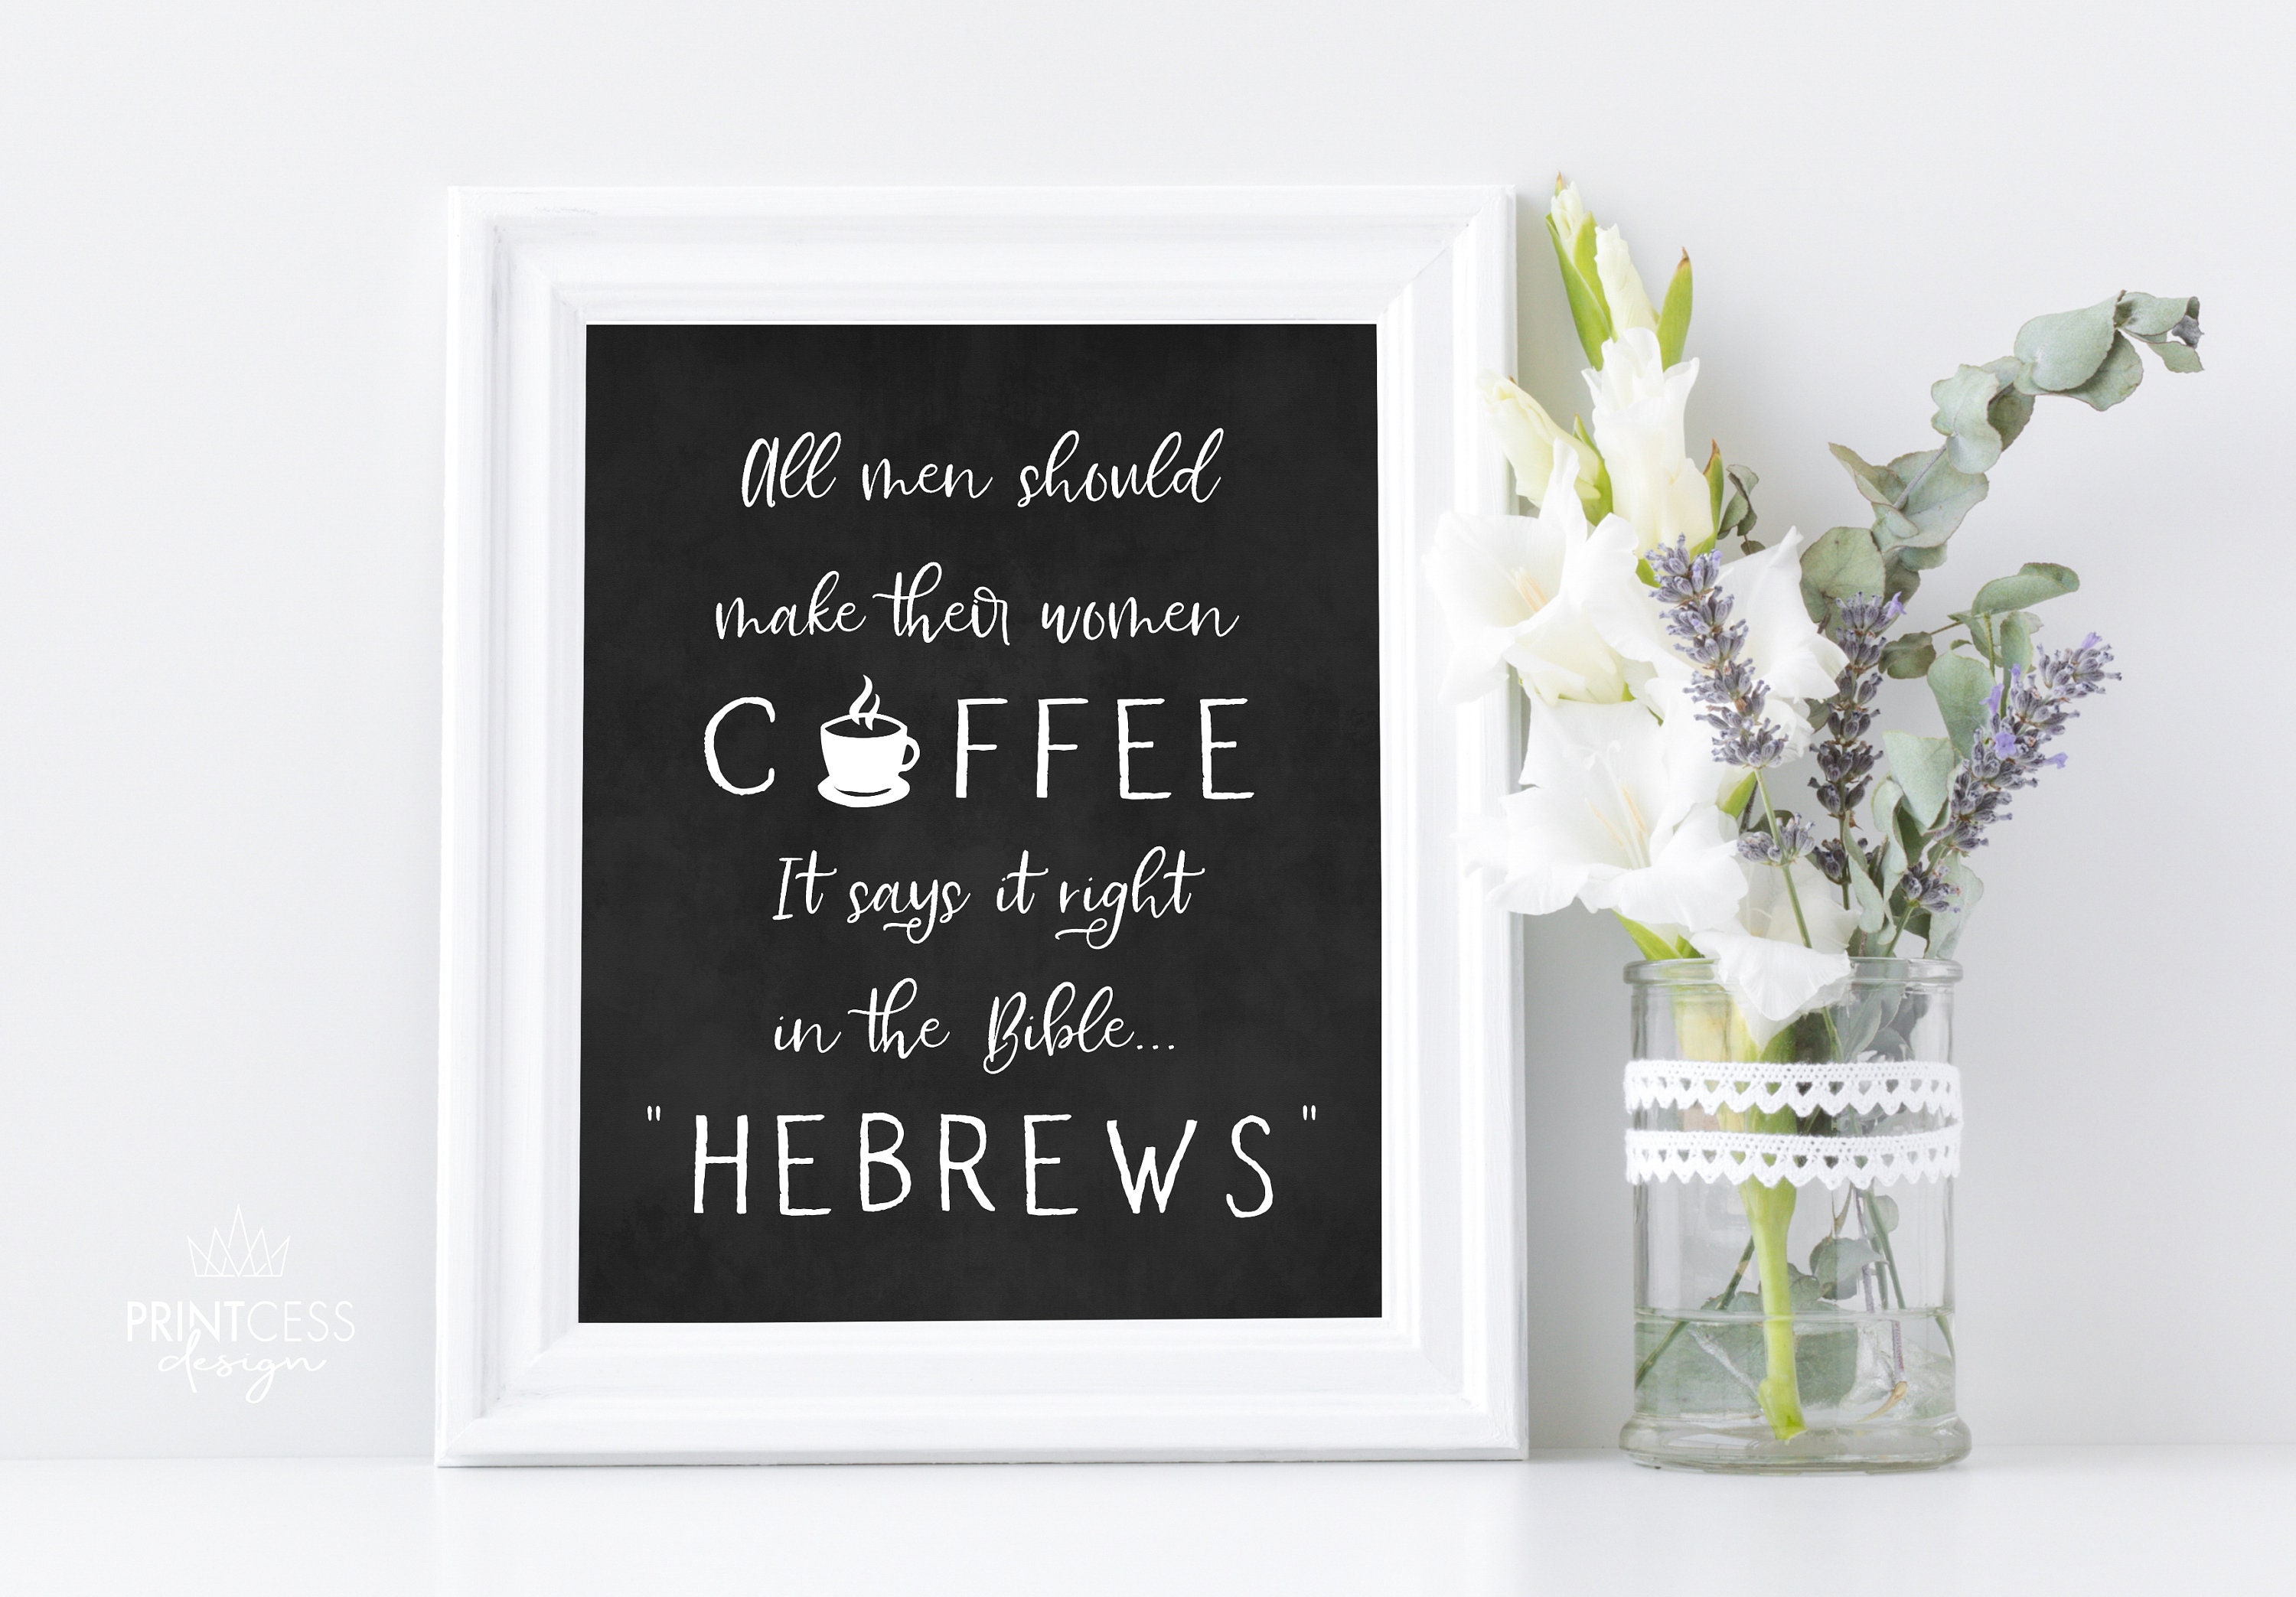 All Men Should Make Coffee For Their Women It Says It Right In The Bible  Hebrews Flour Sack Towel — Granny & Grandpa's Custom Creations Shop